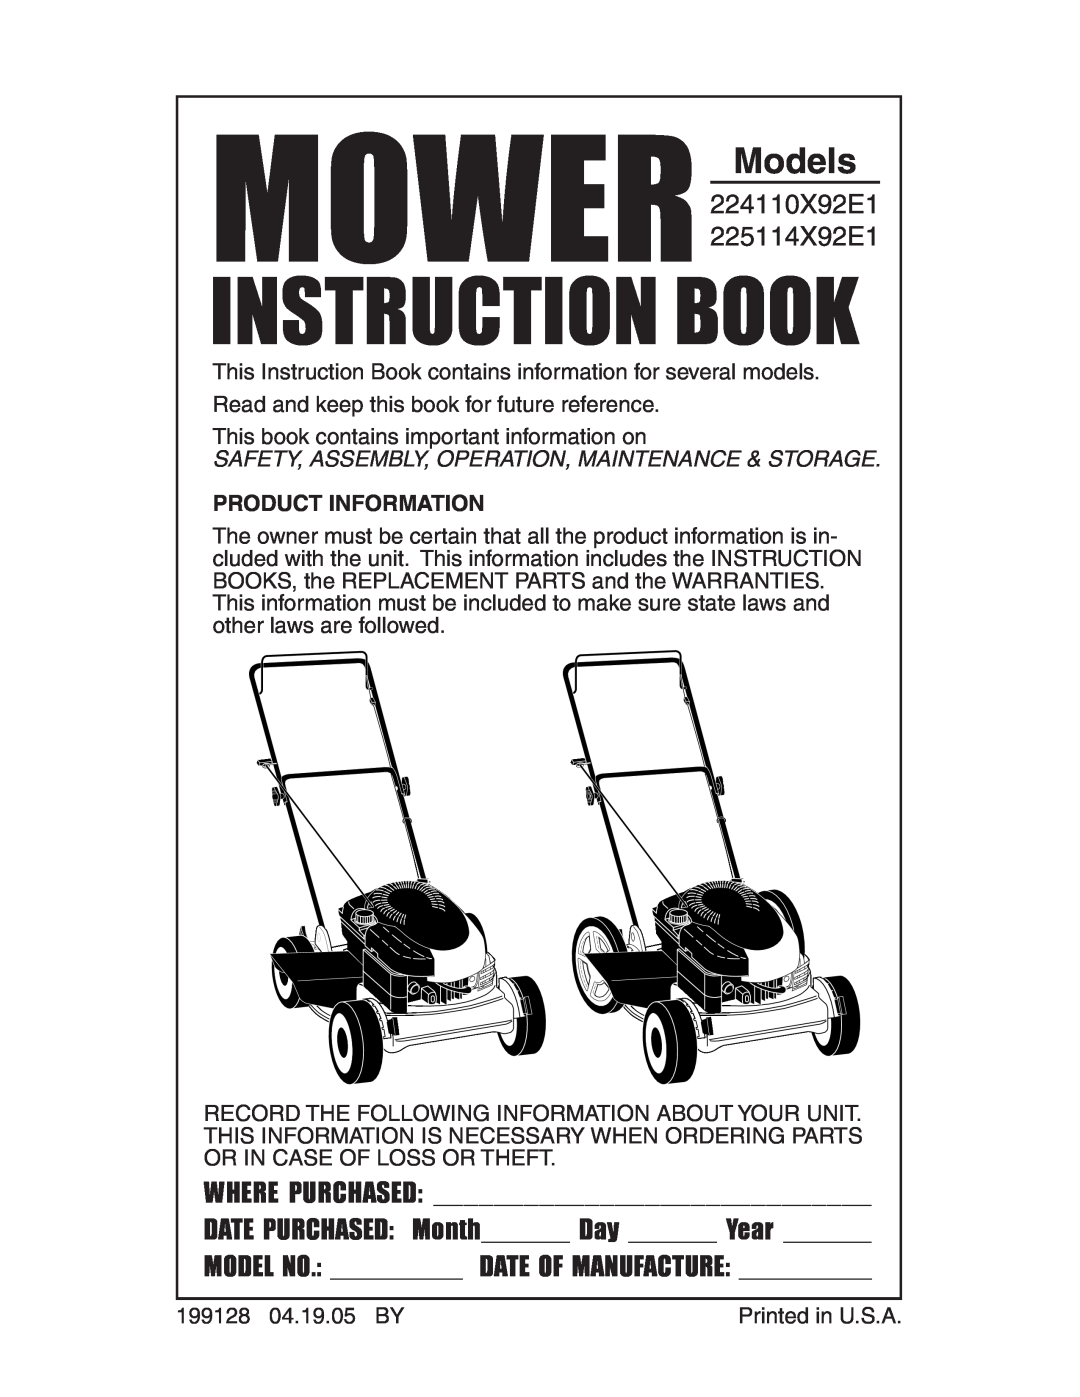 Poulan 199128 manual Product Information, MOWER Models, Instruction Book, 224110X92E1 225114X92E1, Where Purchased 